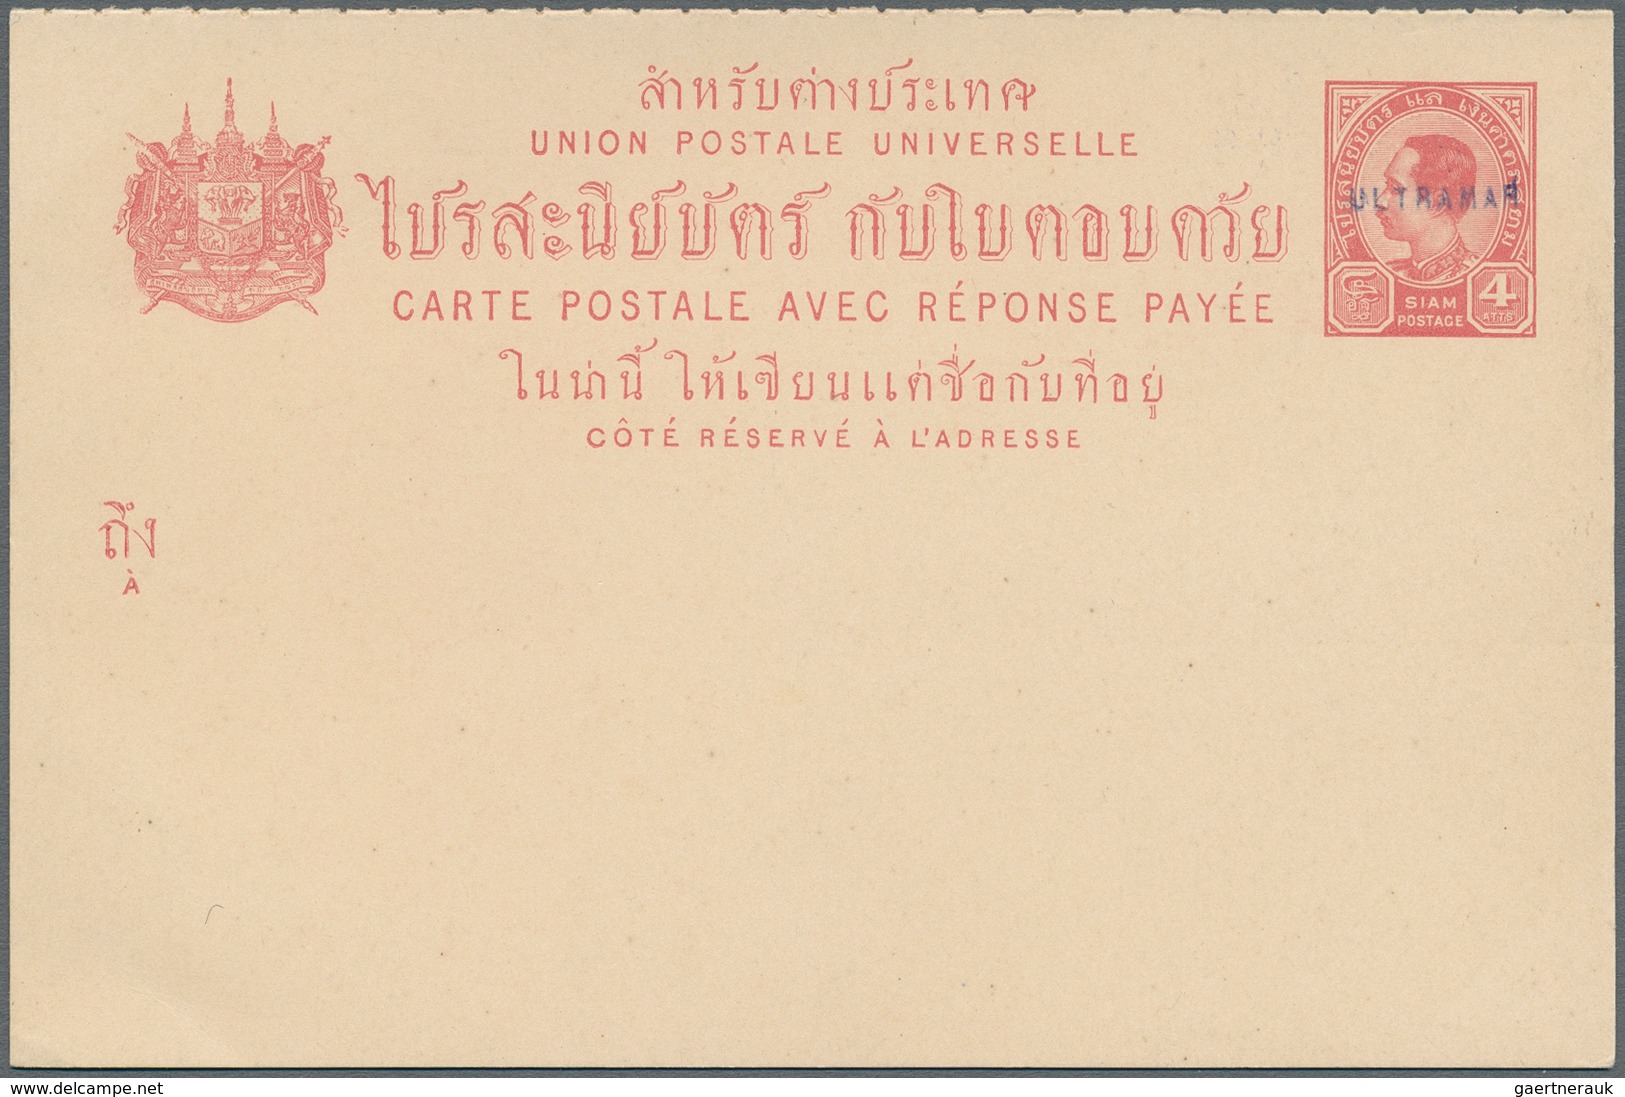 Asien: 1893/1965, Asia incl. some Levant, lot of 35 covers/cards, comprising Aden, Afghanistan, Thai